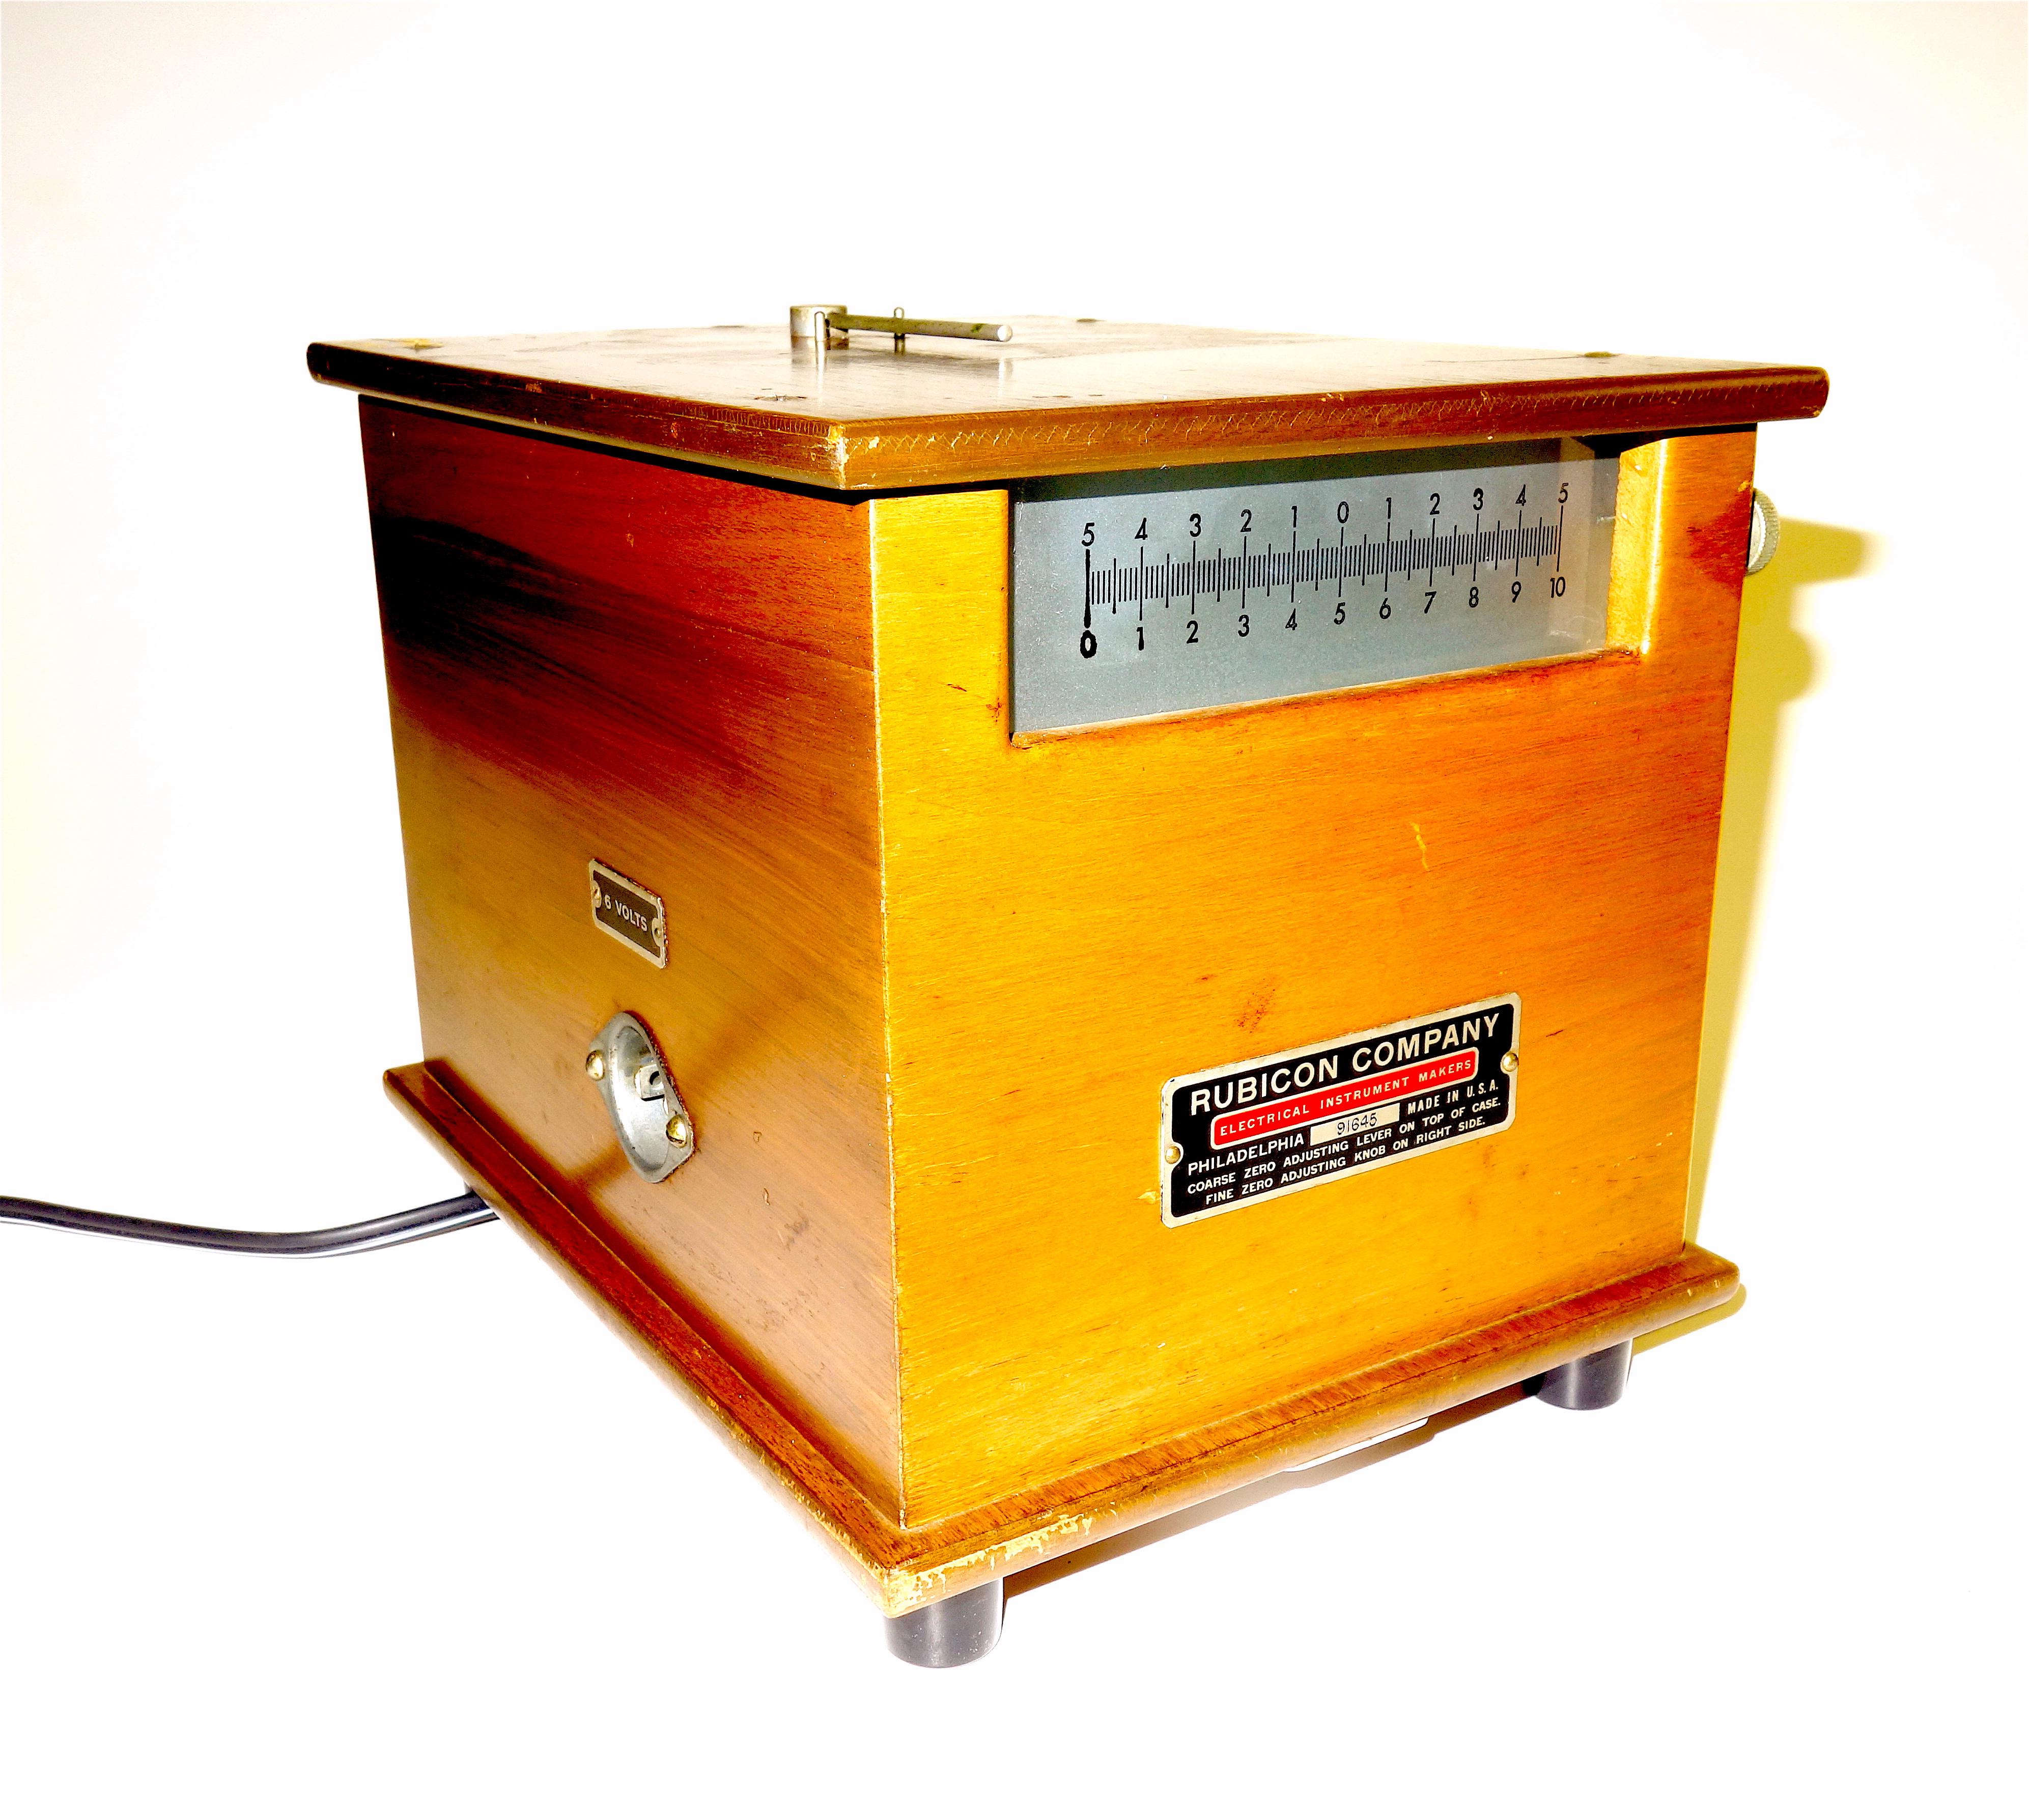 Submitted for your consideration is this rare Rubicon Reflecting Galvanometer, circa mid-20th century.
Presenting in the original wood (appears to be mahogany) cabinet housing with glass dial for illuminated readings. Still operational it appears,